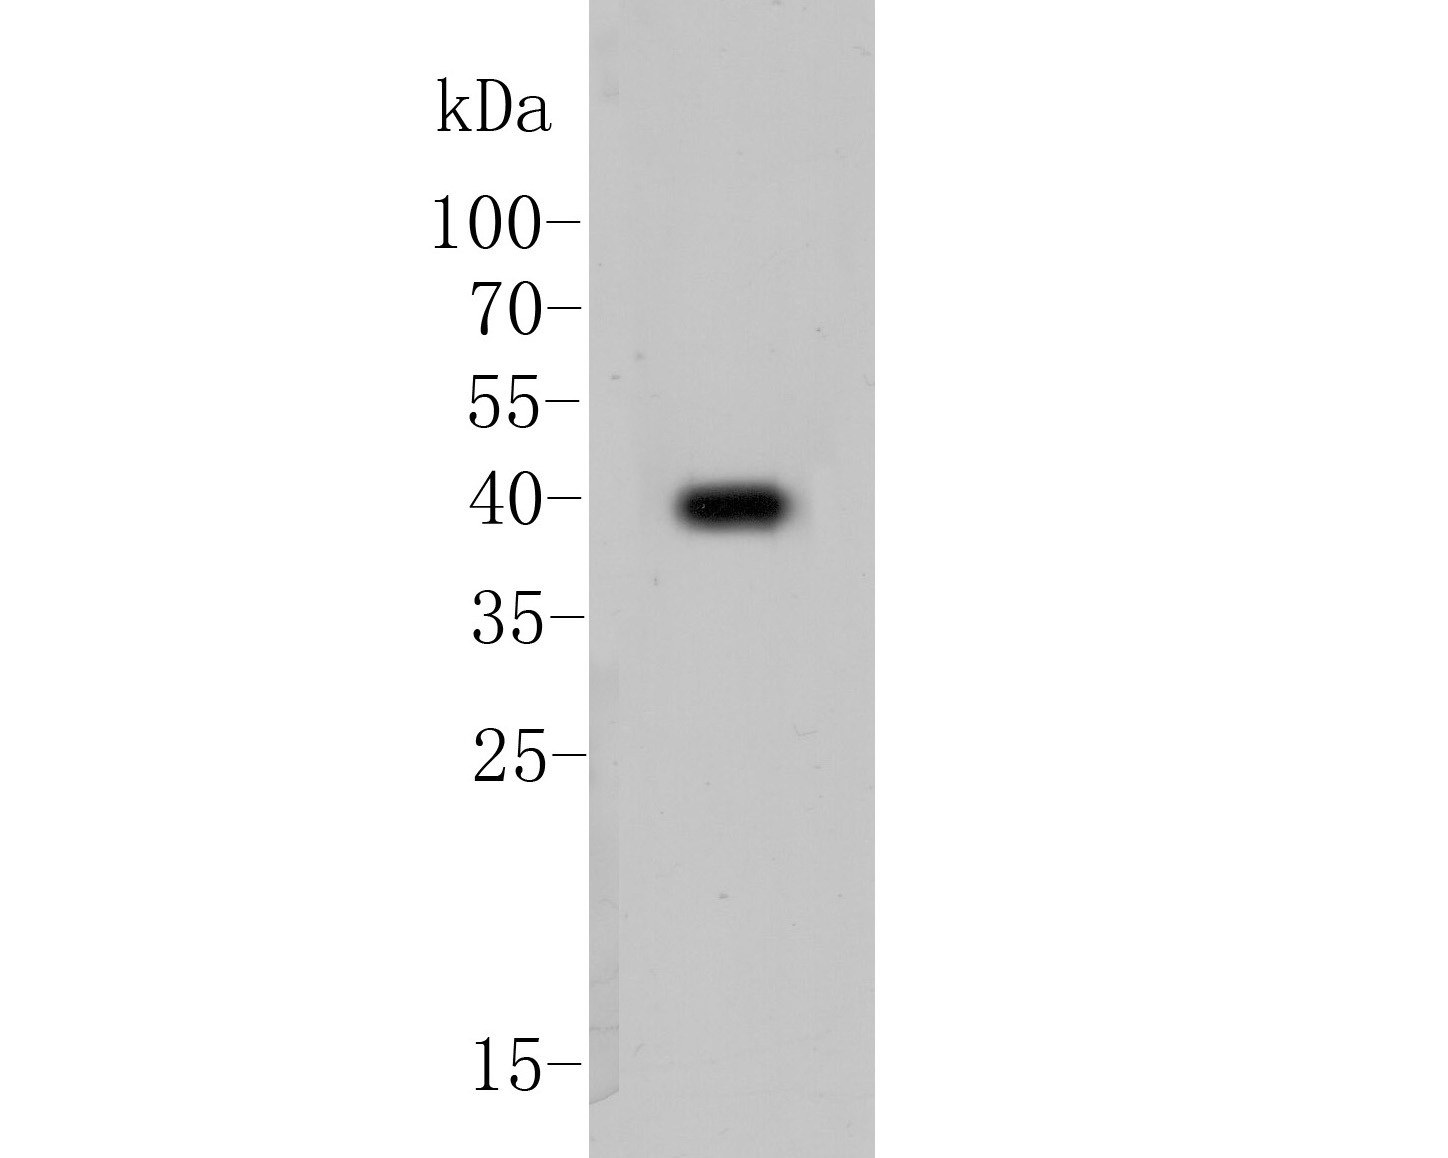 Western blot analysis of Cytokeratin 19 on MCF-7 cell lysate. Proteins were transferred to a PVDF membrane and blocked with 5% BSA in PBS for 1 hour at room temperature. The primary antibody (EM1901-76, 1/5,000) was used in 5% BSA at room temperature for 2 hours. Goat Anti-Mouse IgG - HRP Secondary Antibody (HA1006) at 1:5,000 dilution was used for 1 hour at room temperature.